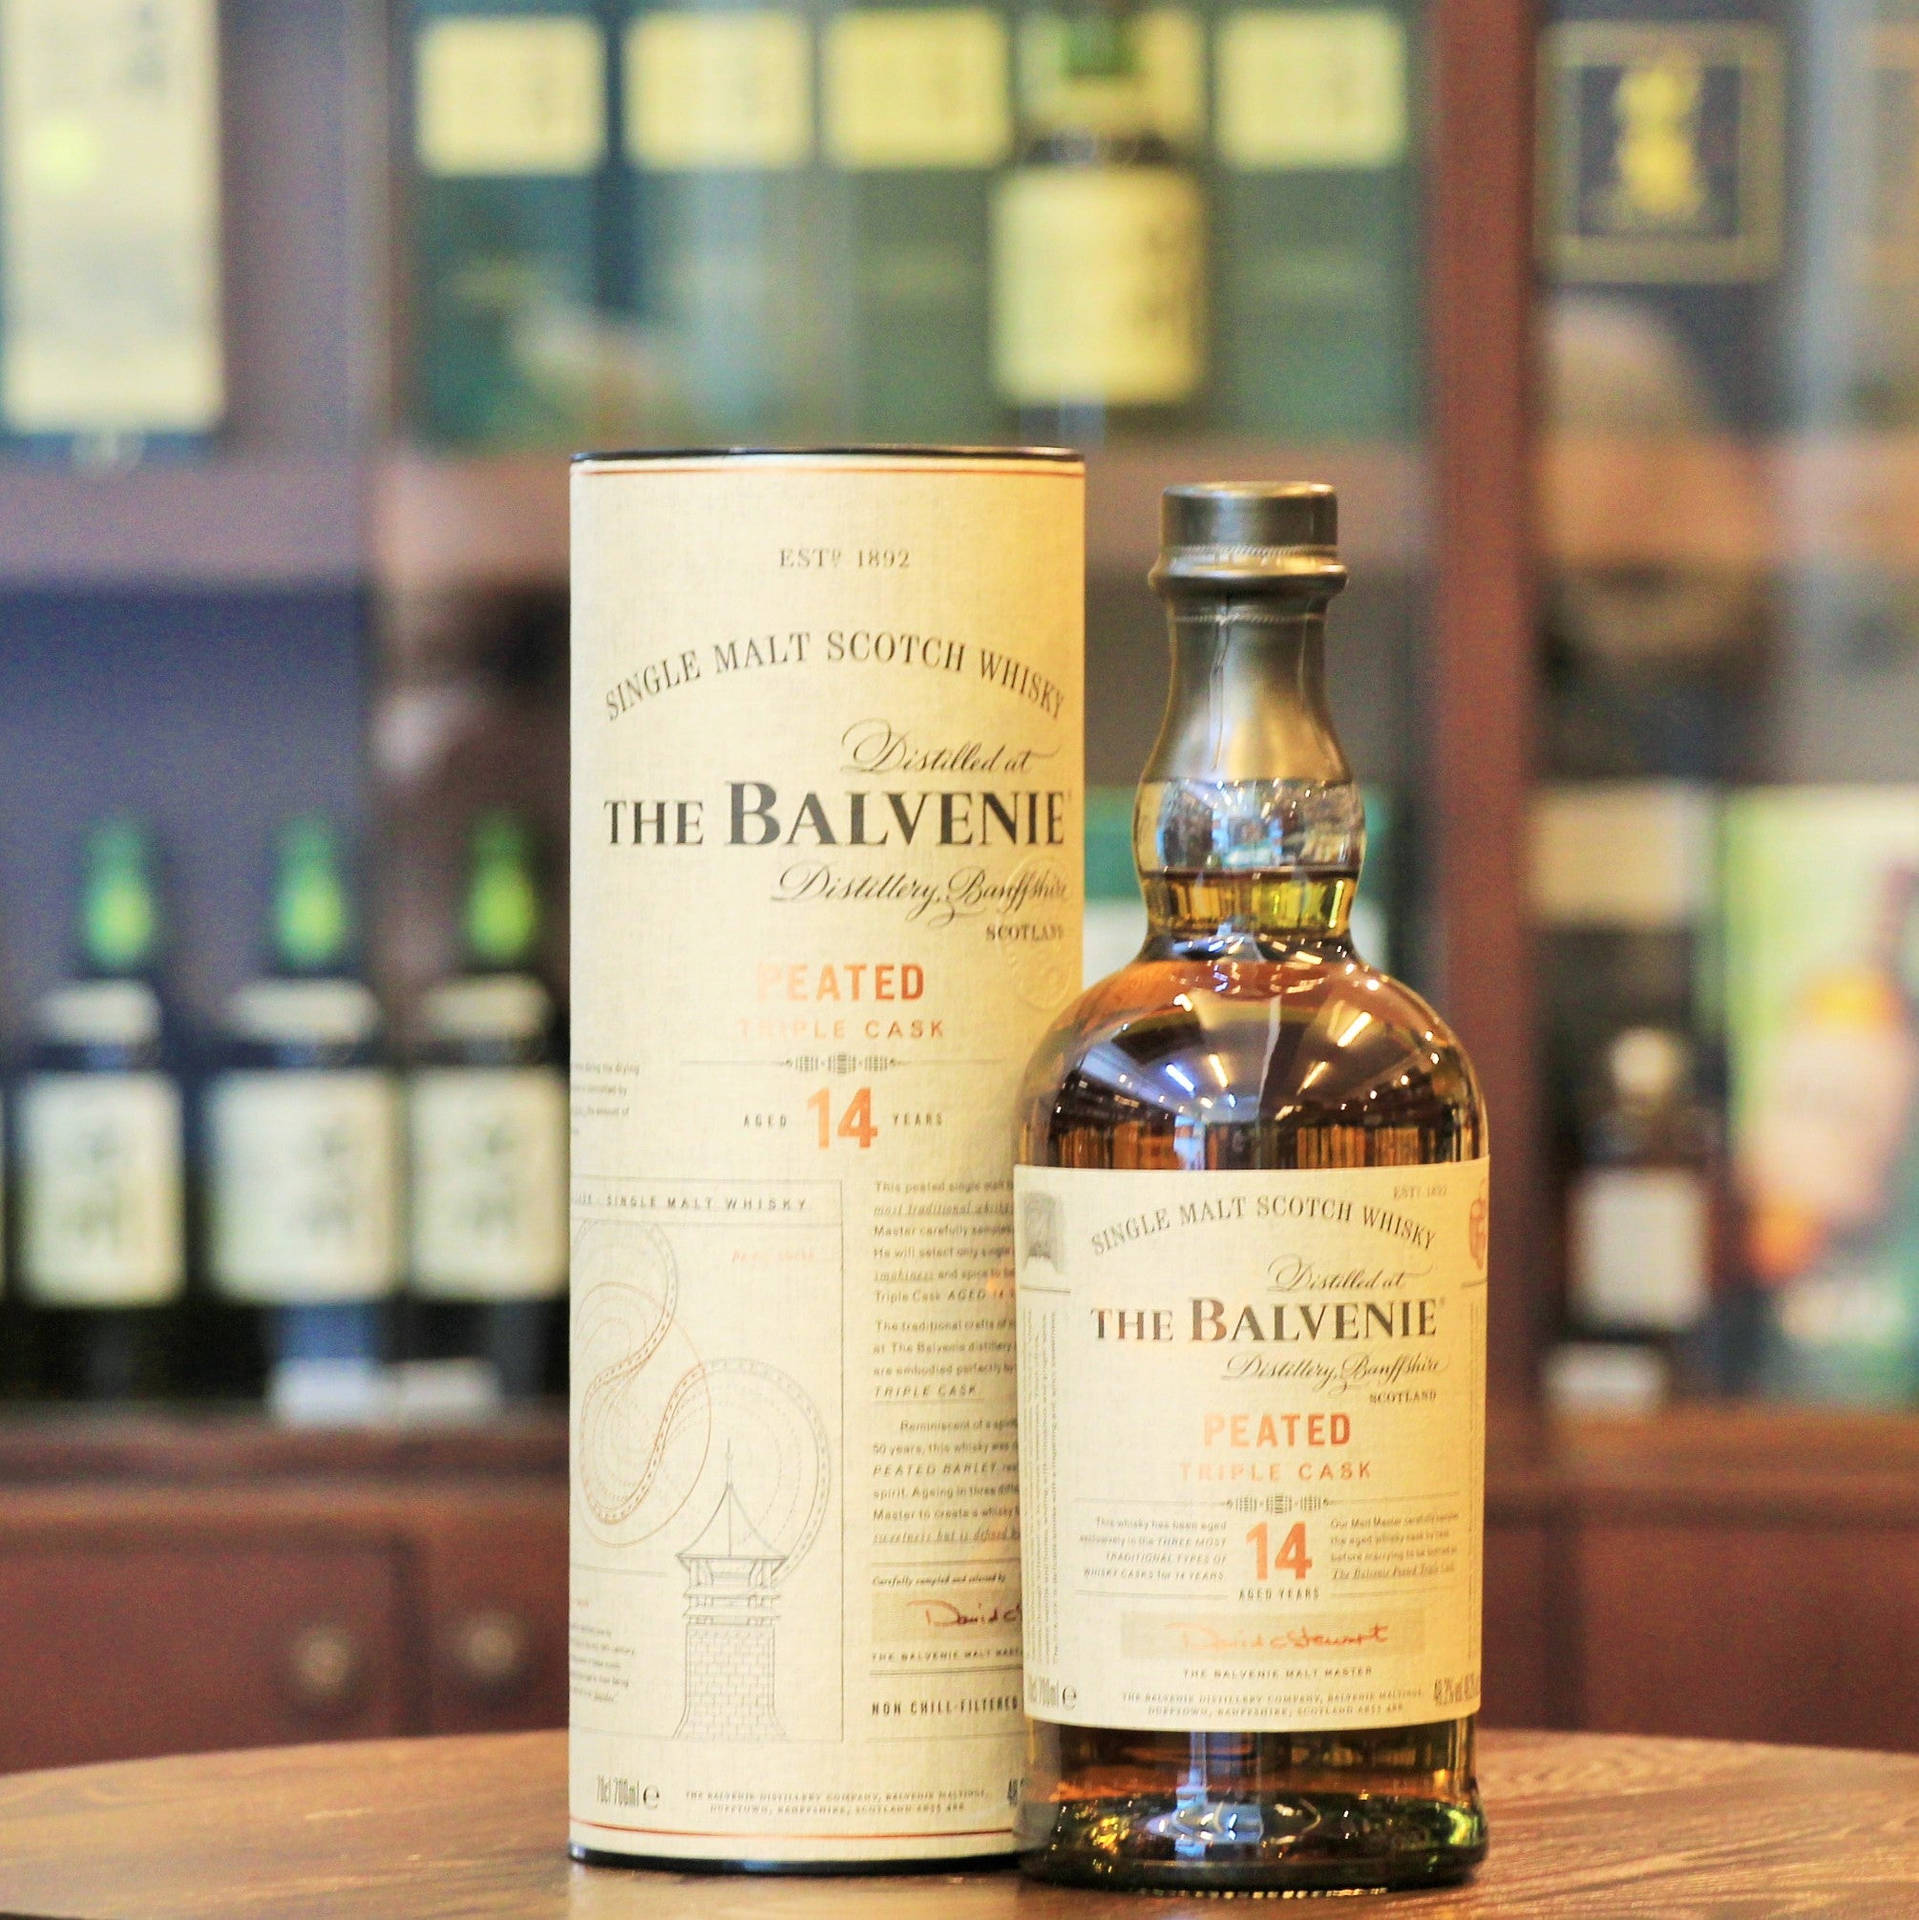 Caption: The Balvenie Peated Triple Cask 14 Years Old Scotch Whisky Wallpaper